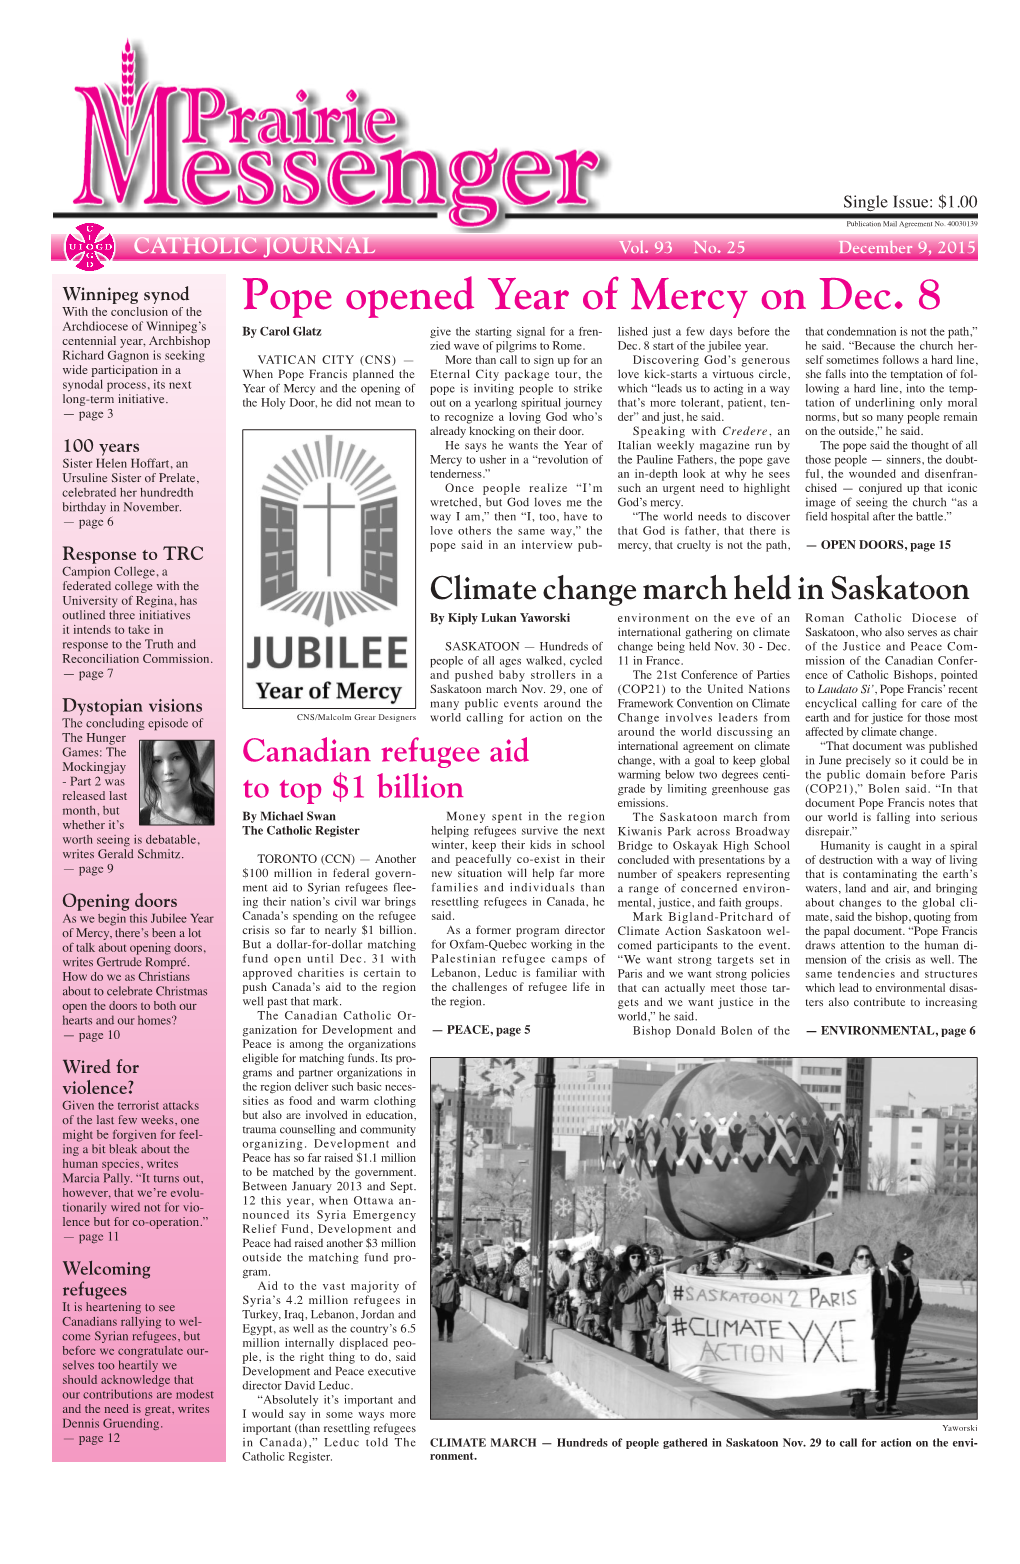 Pope Opened Year of Mercy on Dec. 8